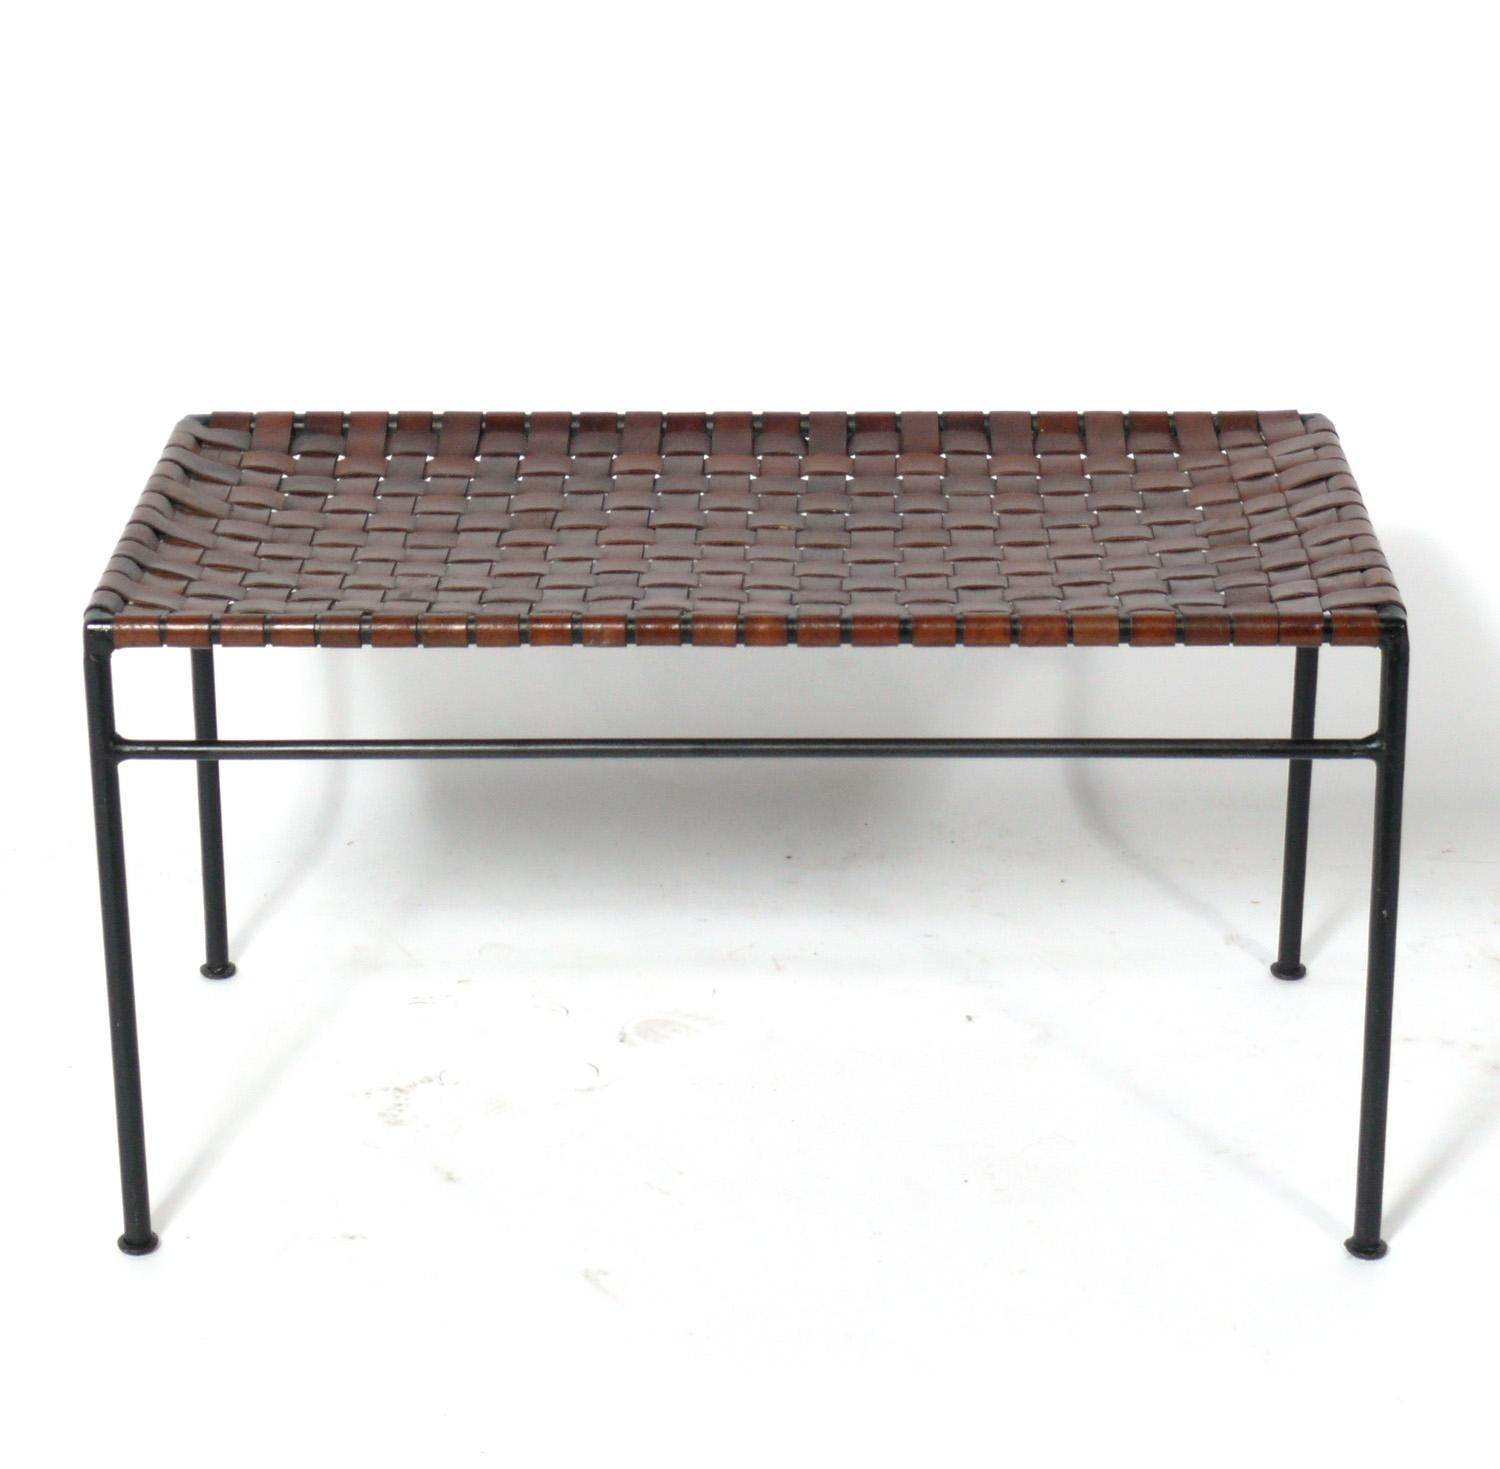 Iron and woven leather strap bench, in the manner of Lila Swift and Donald Monell, American, circa 1980s. Retains warm original patina.